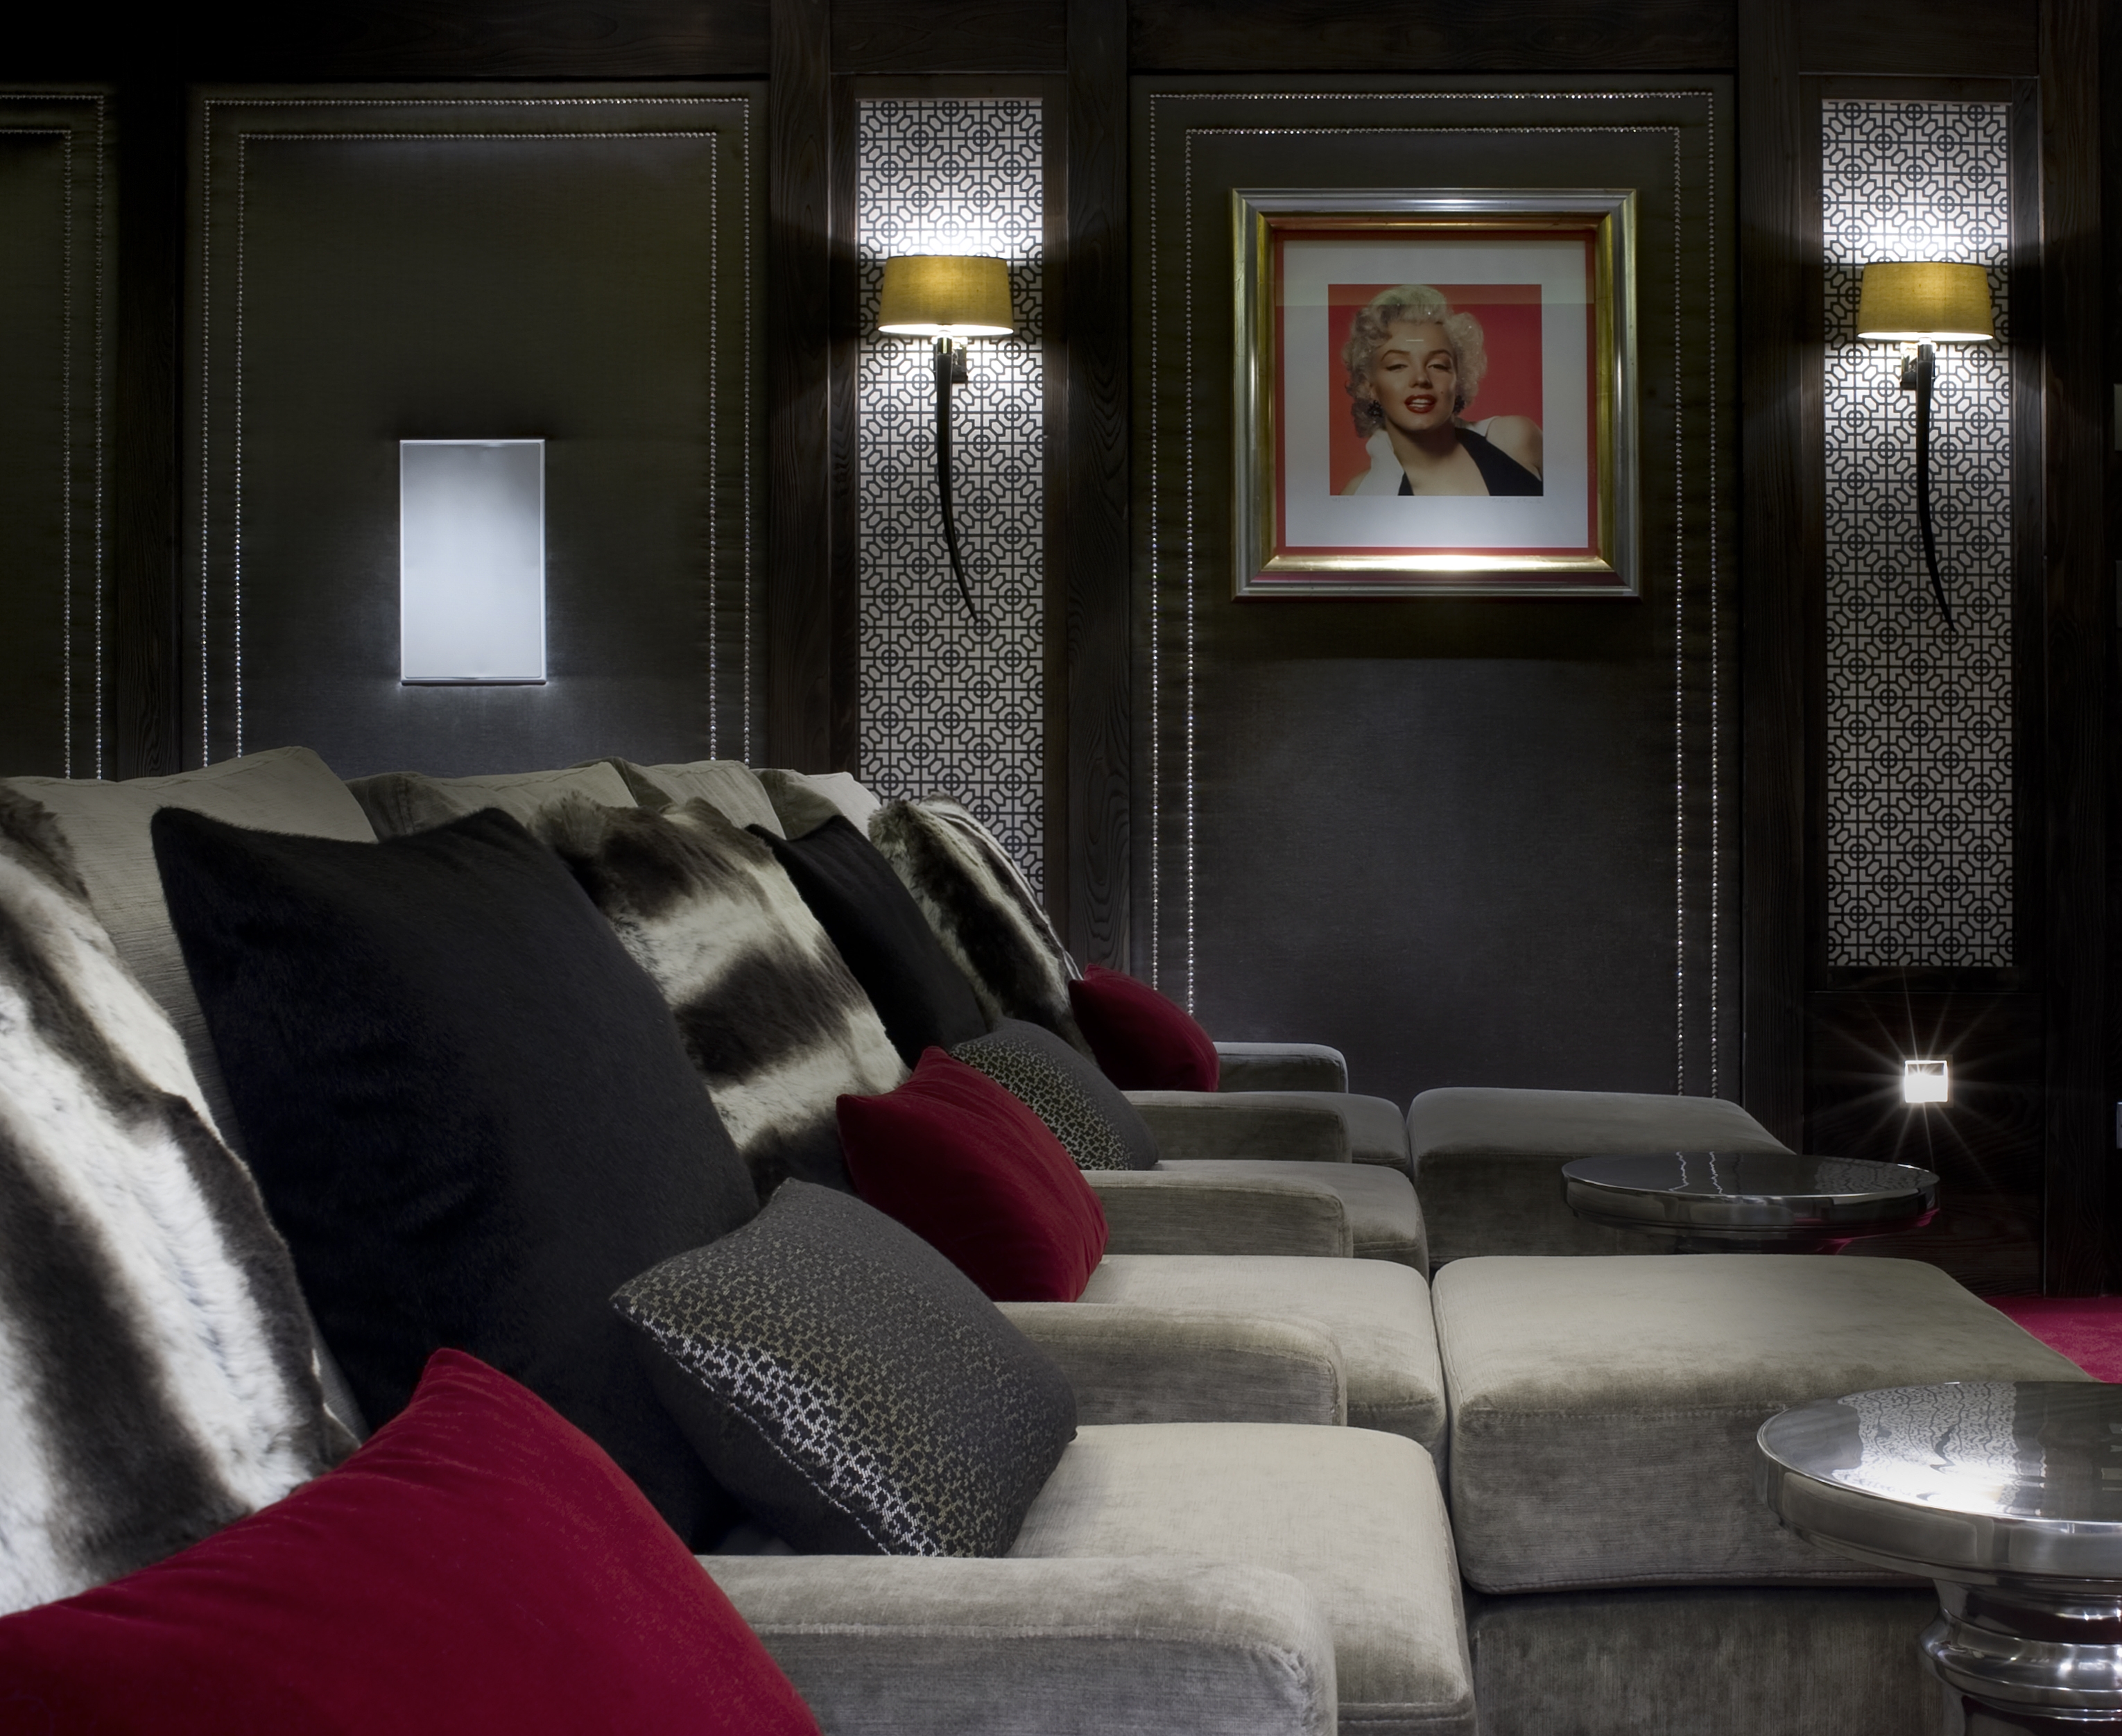 Audio Visual & Home Integration: Private Homes with Cinema Rooms